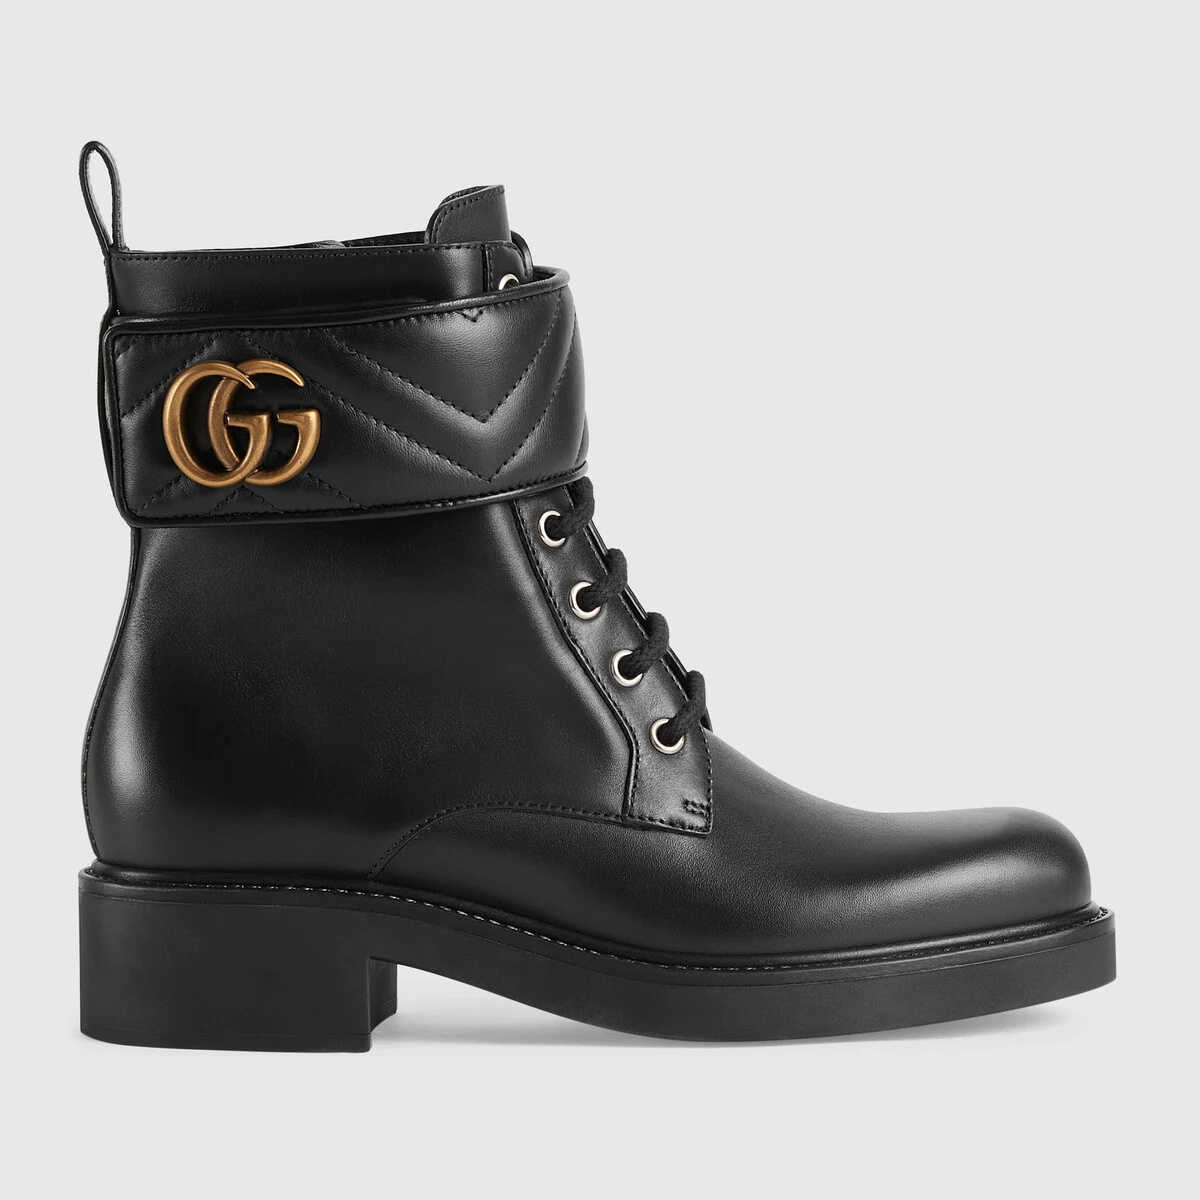 Women's ankle boot with Double G - 1